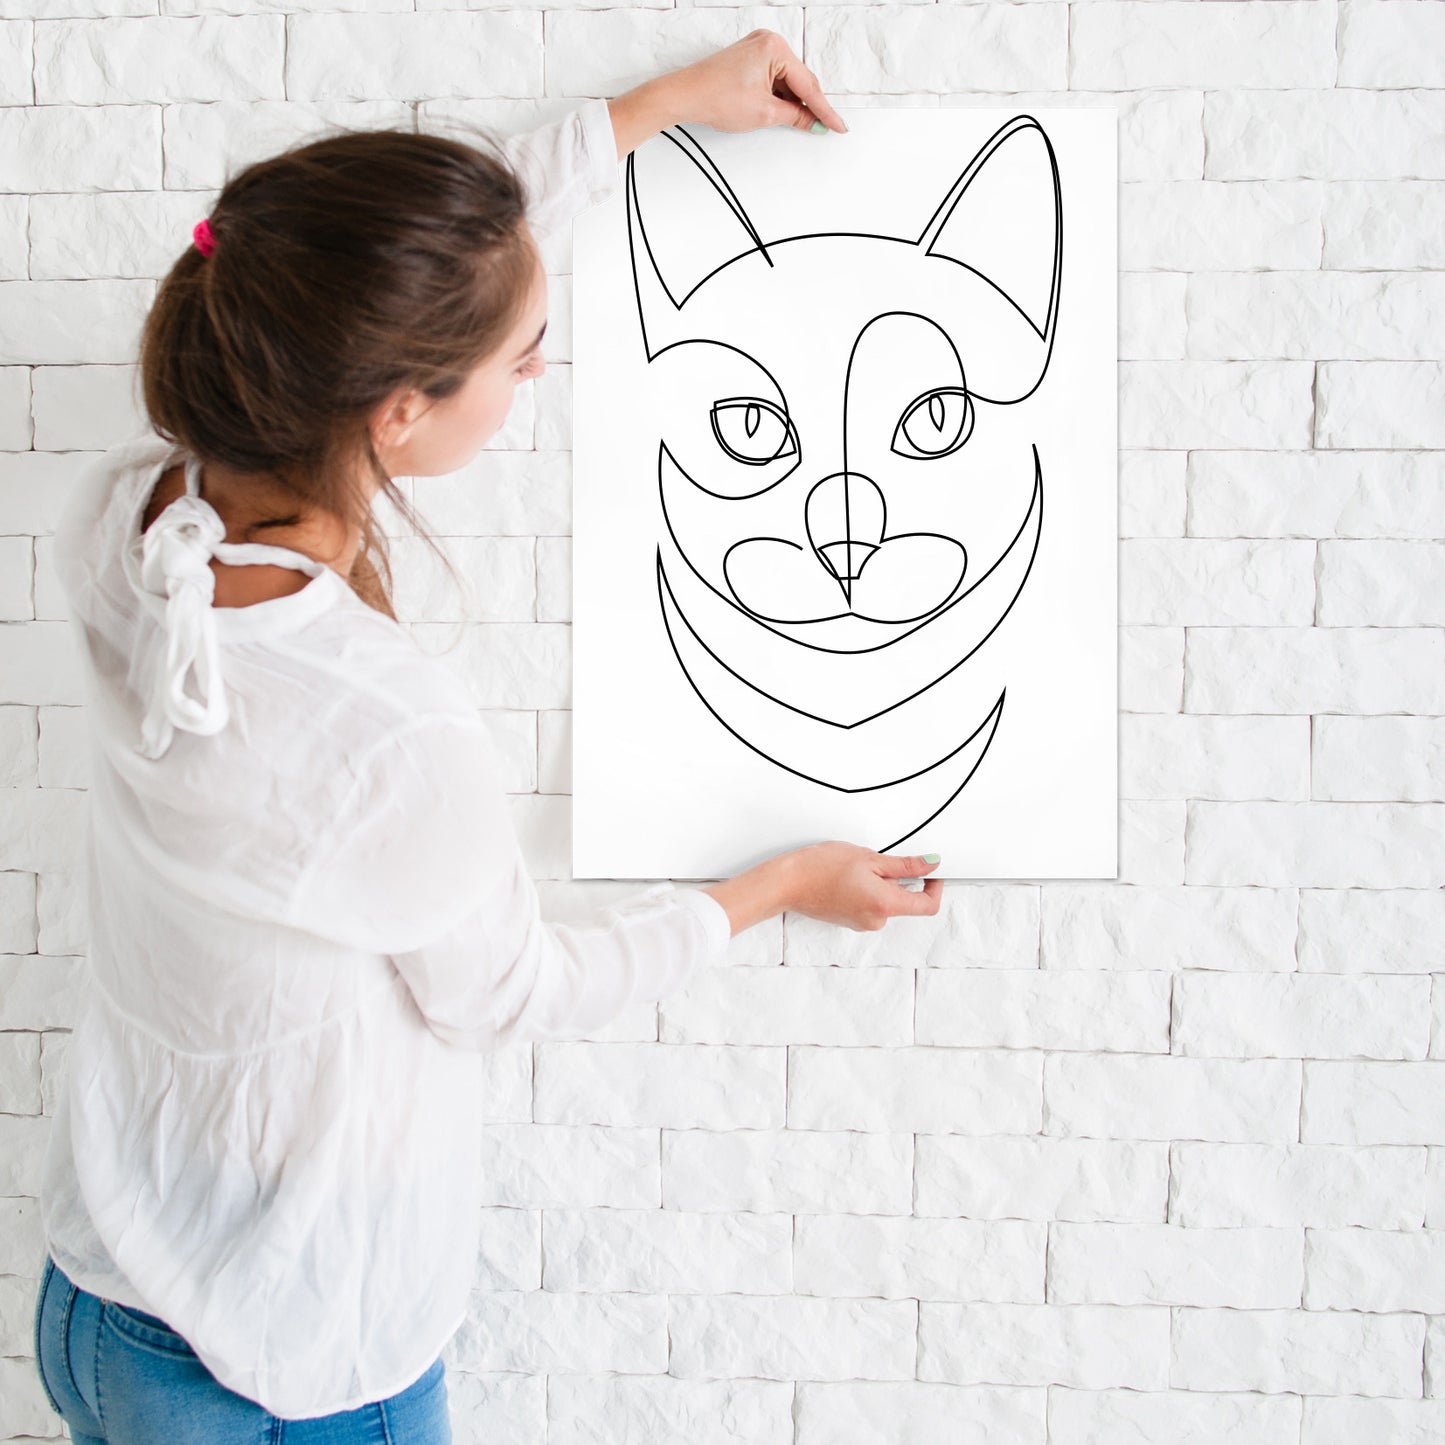 One Line Cat by Addillum - Canvas, Poster or Framed Print